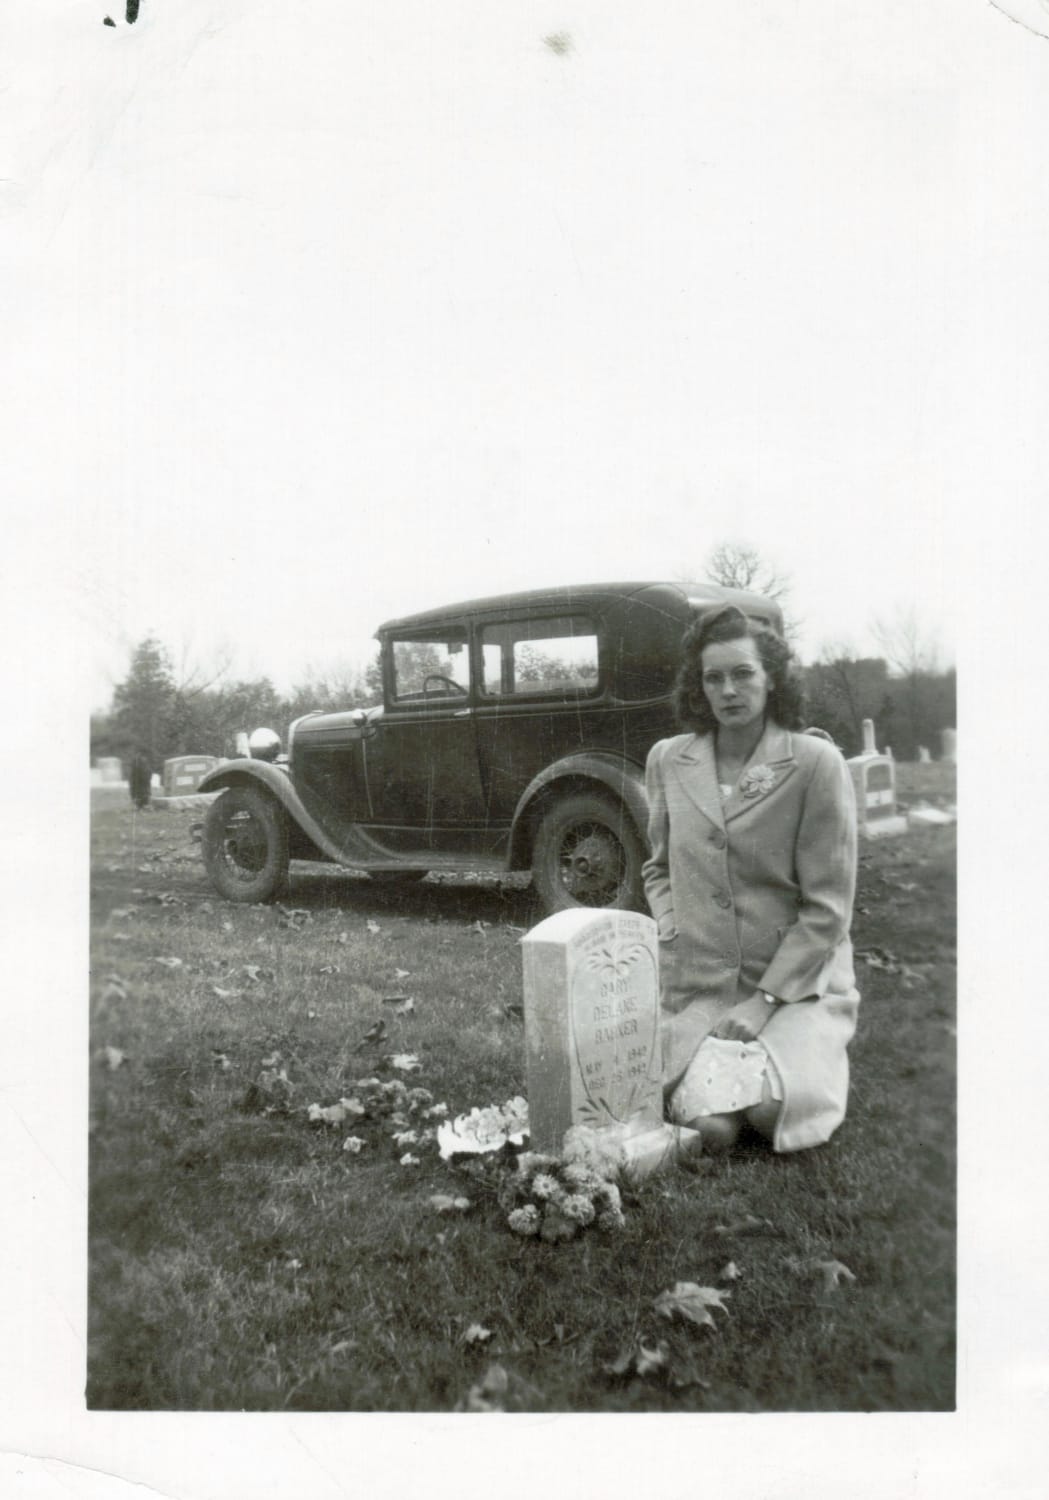 1943 - Edna May Baker at the grave of her deceased 7 month old son